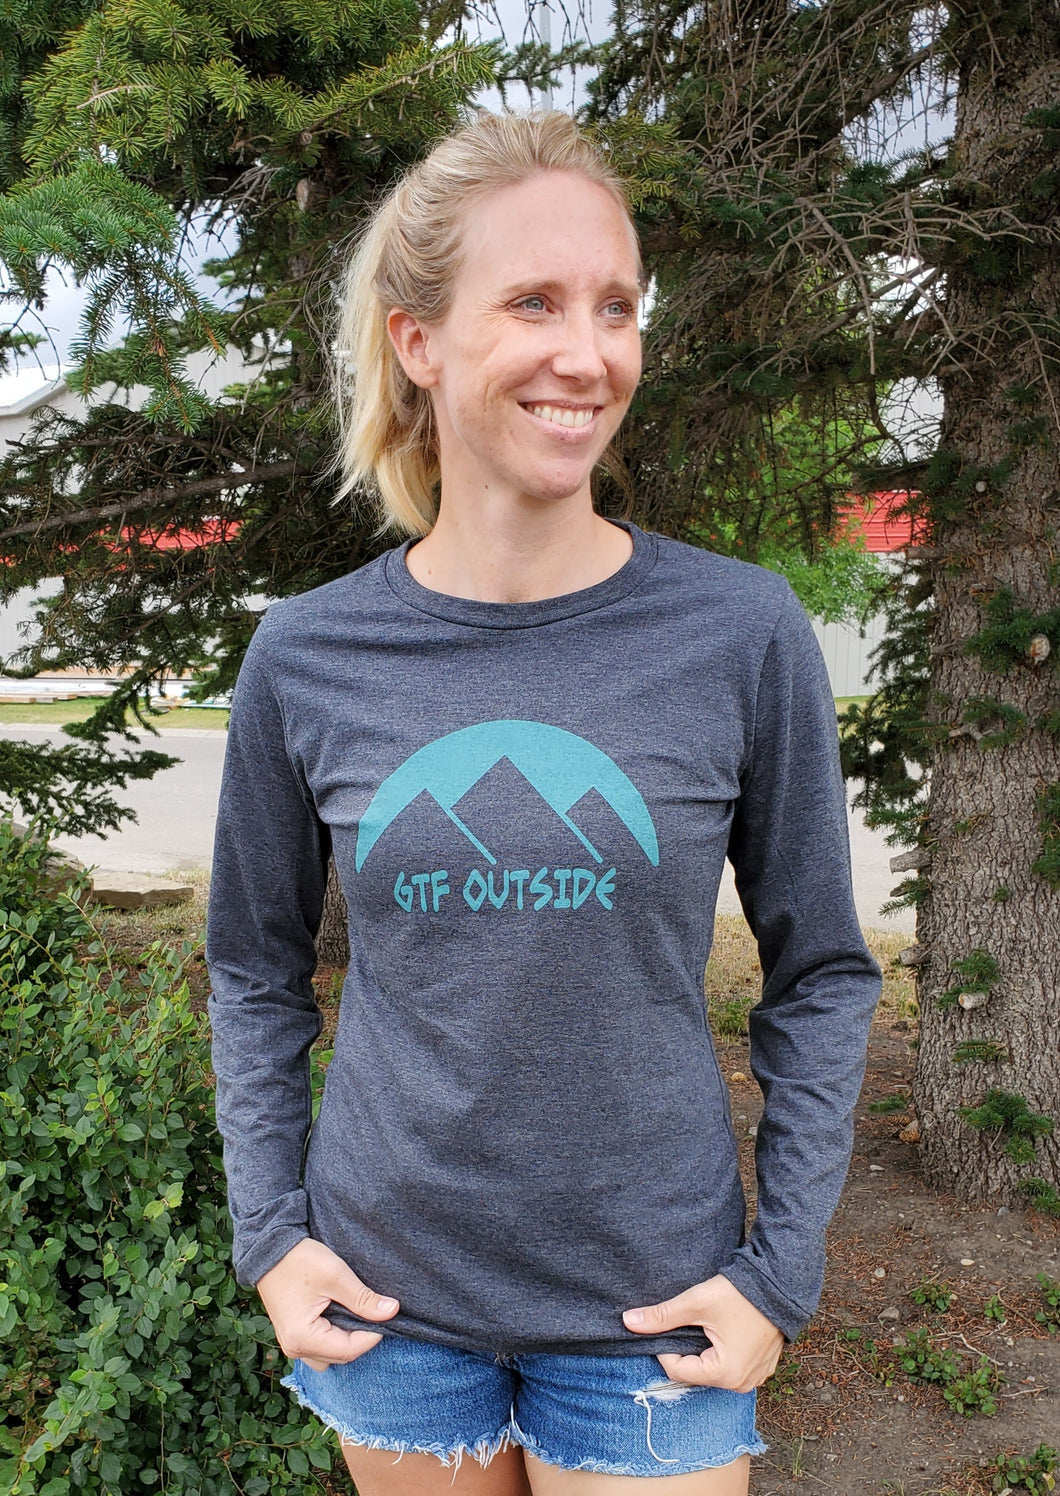 ladies long sleeve, canadian made, grey long sleeve, long sleeve with mountains, gtfoutside